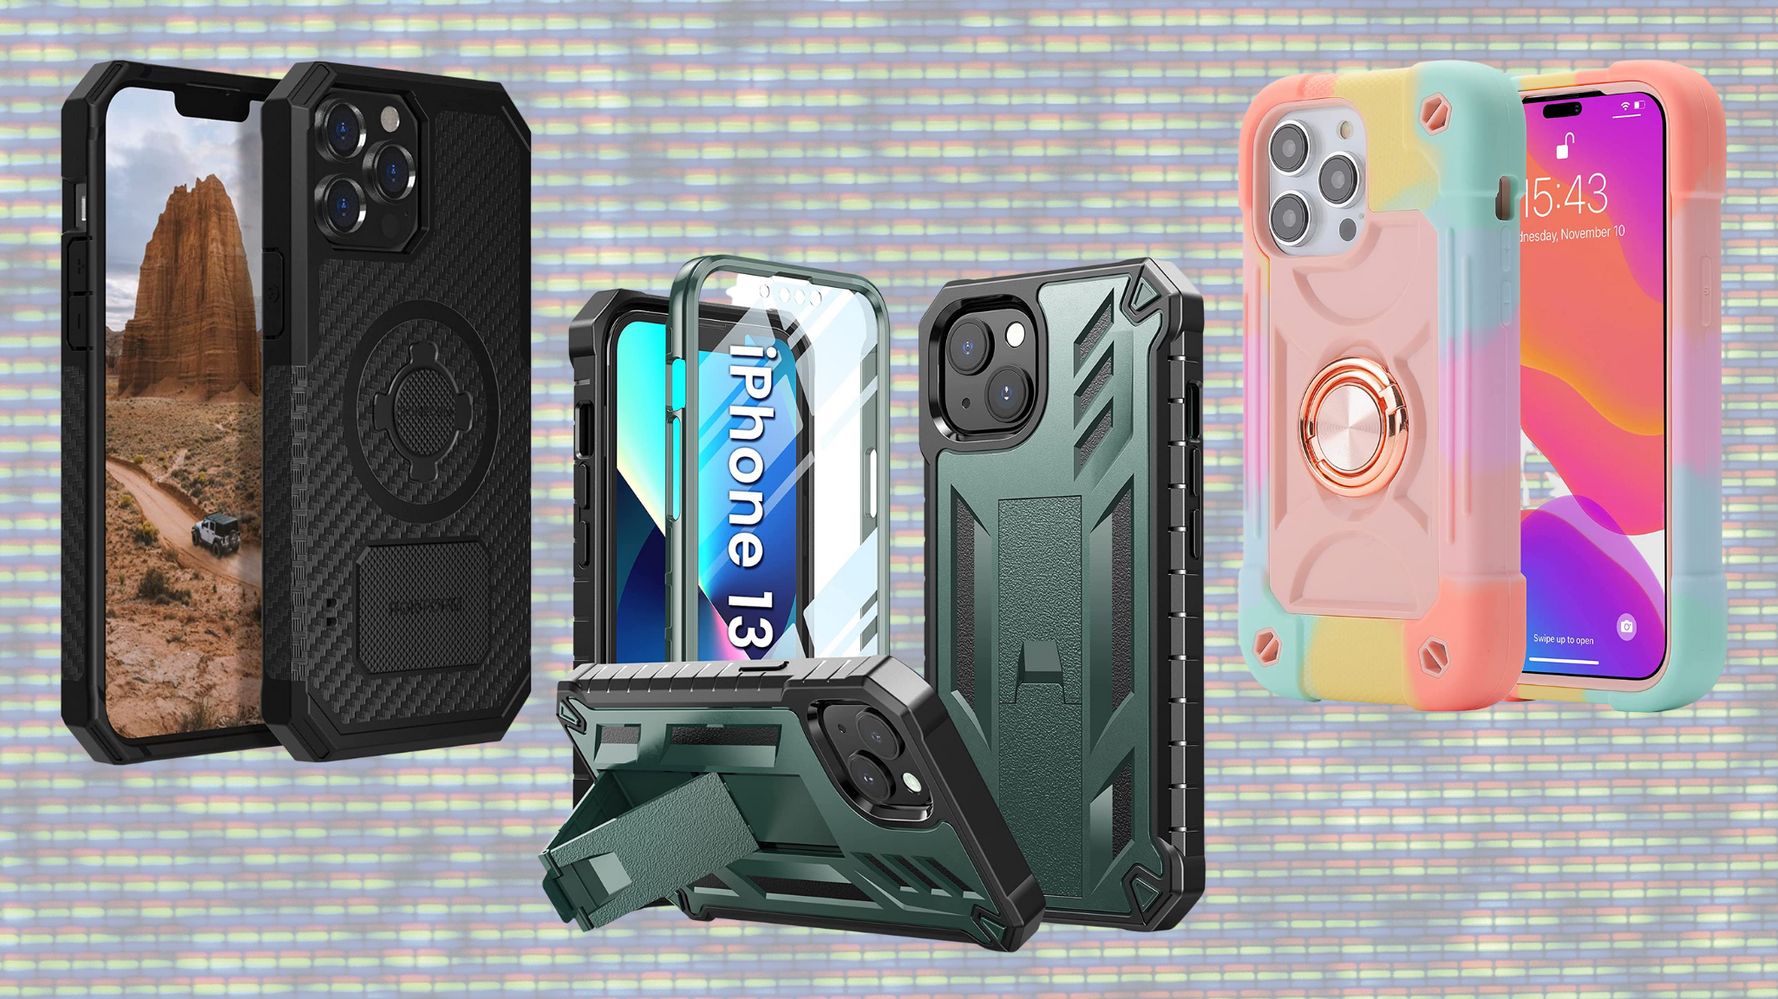 Protective iPhone 12 and iPhone 12 Pro Case Delivers Everyday